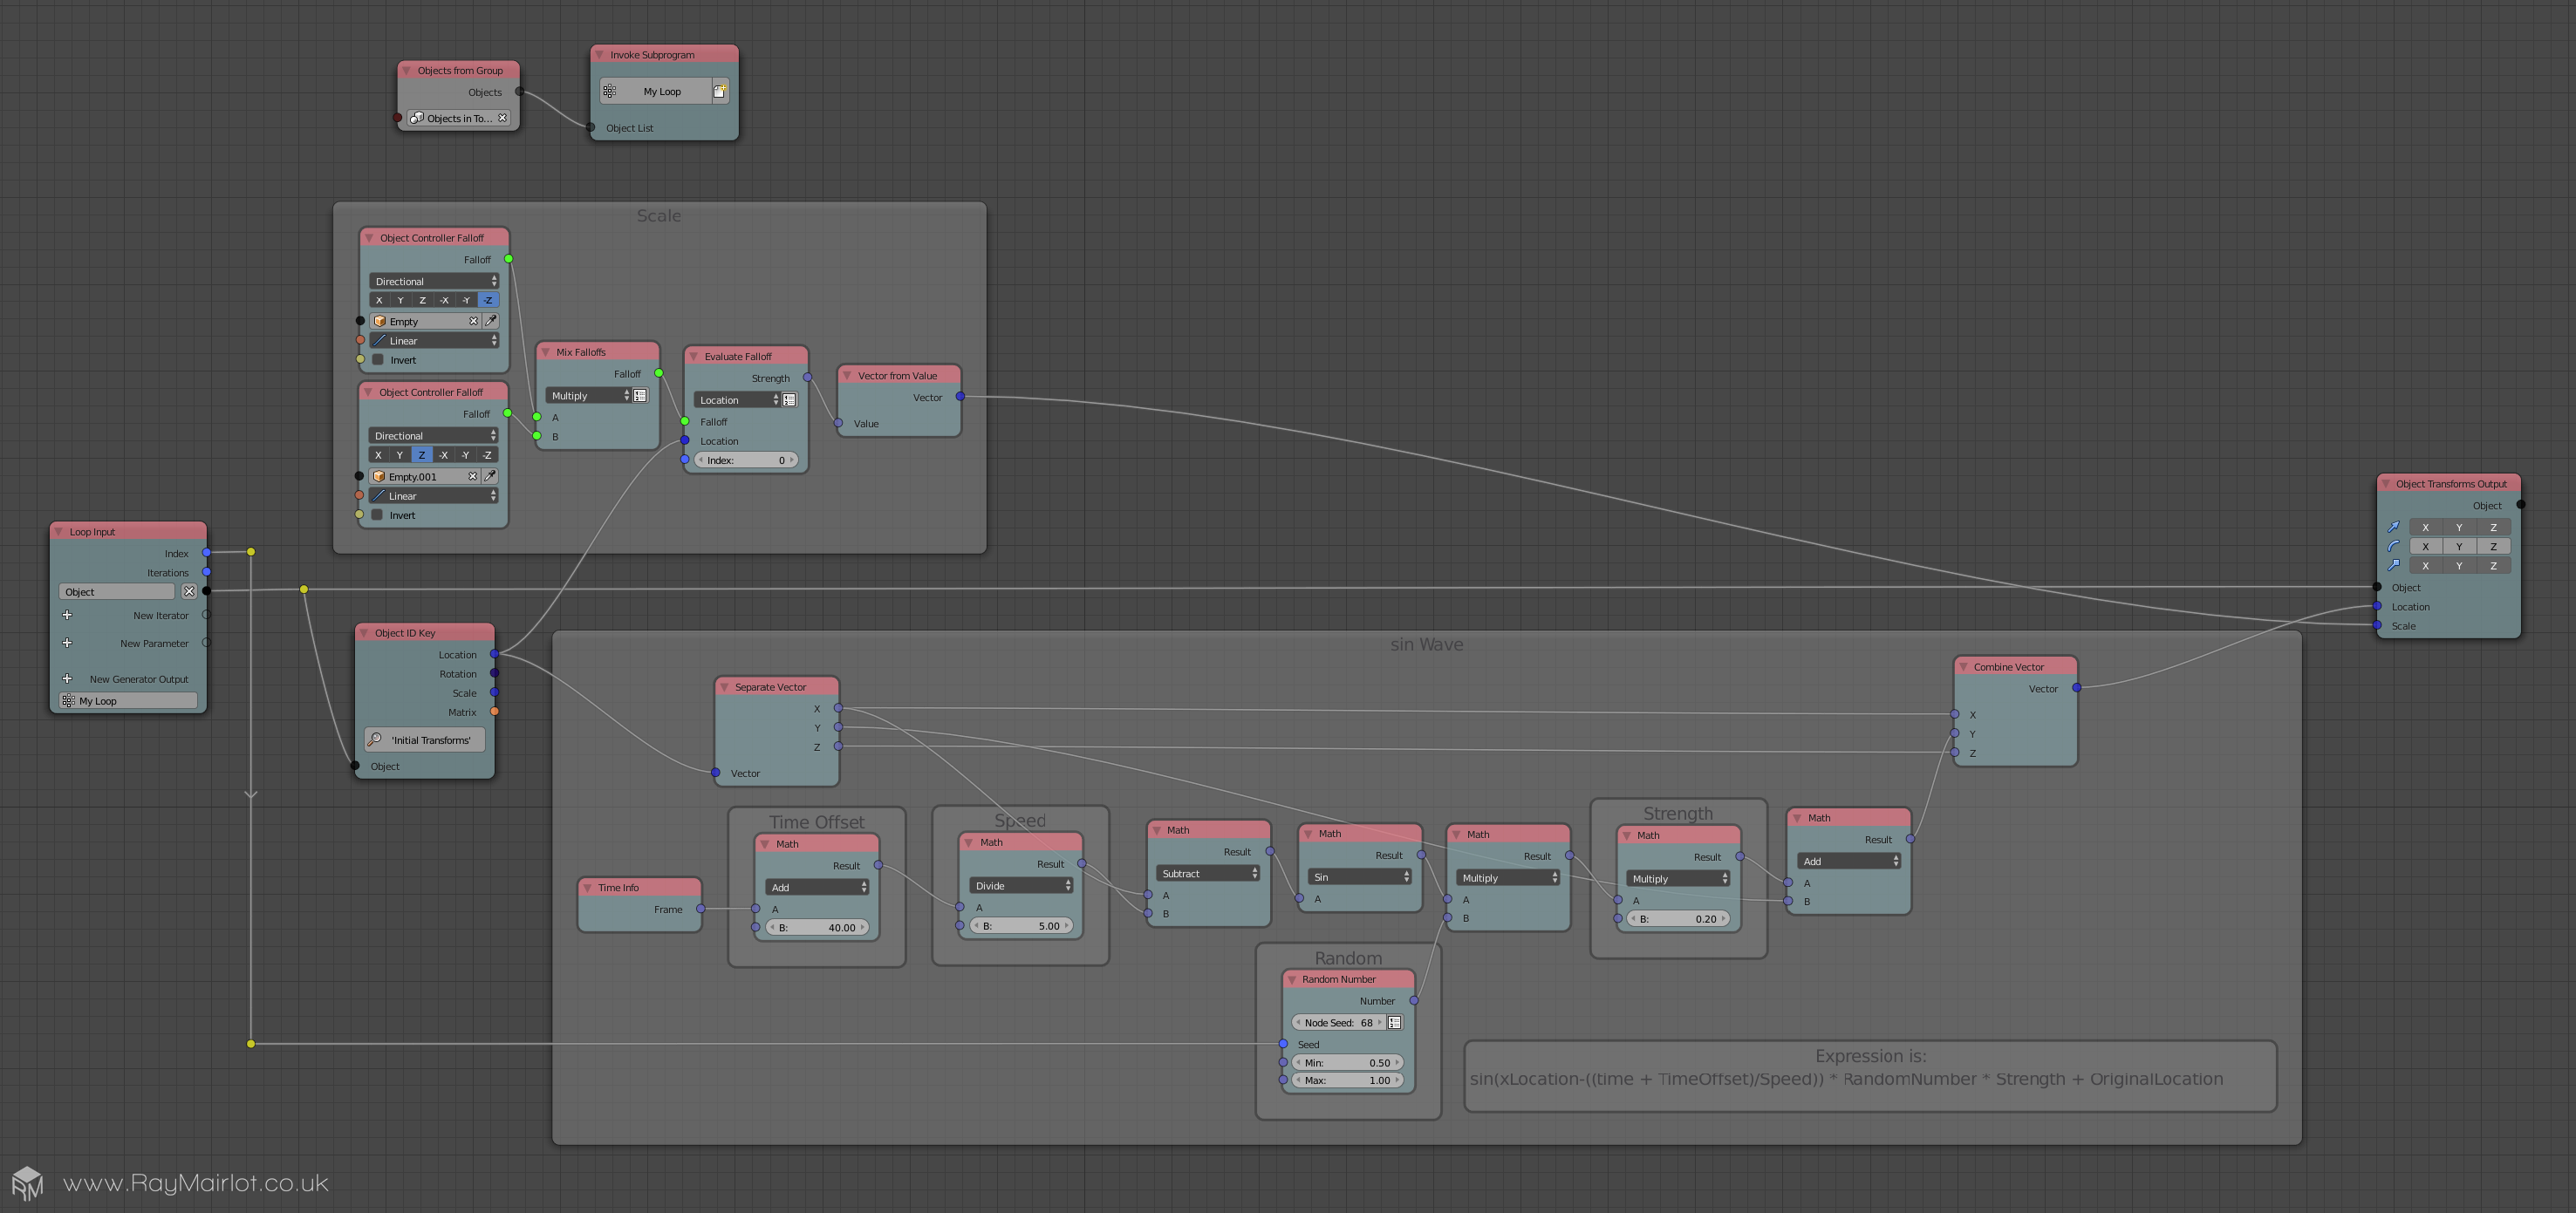 A screenshot from within Blender 3D showing an 'Animation Nodes' node graph. Some nodes are in a frame called 'Scale' and some are in a frame called 'sin Wave'.